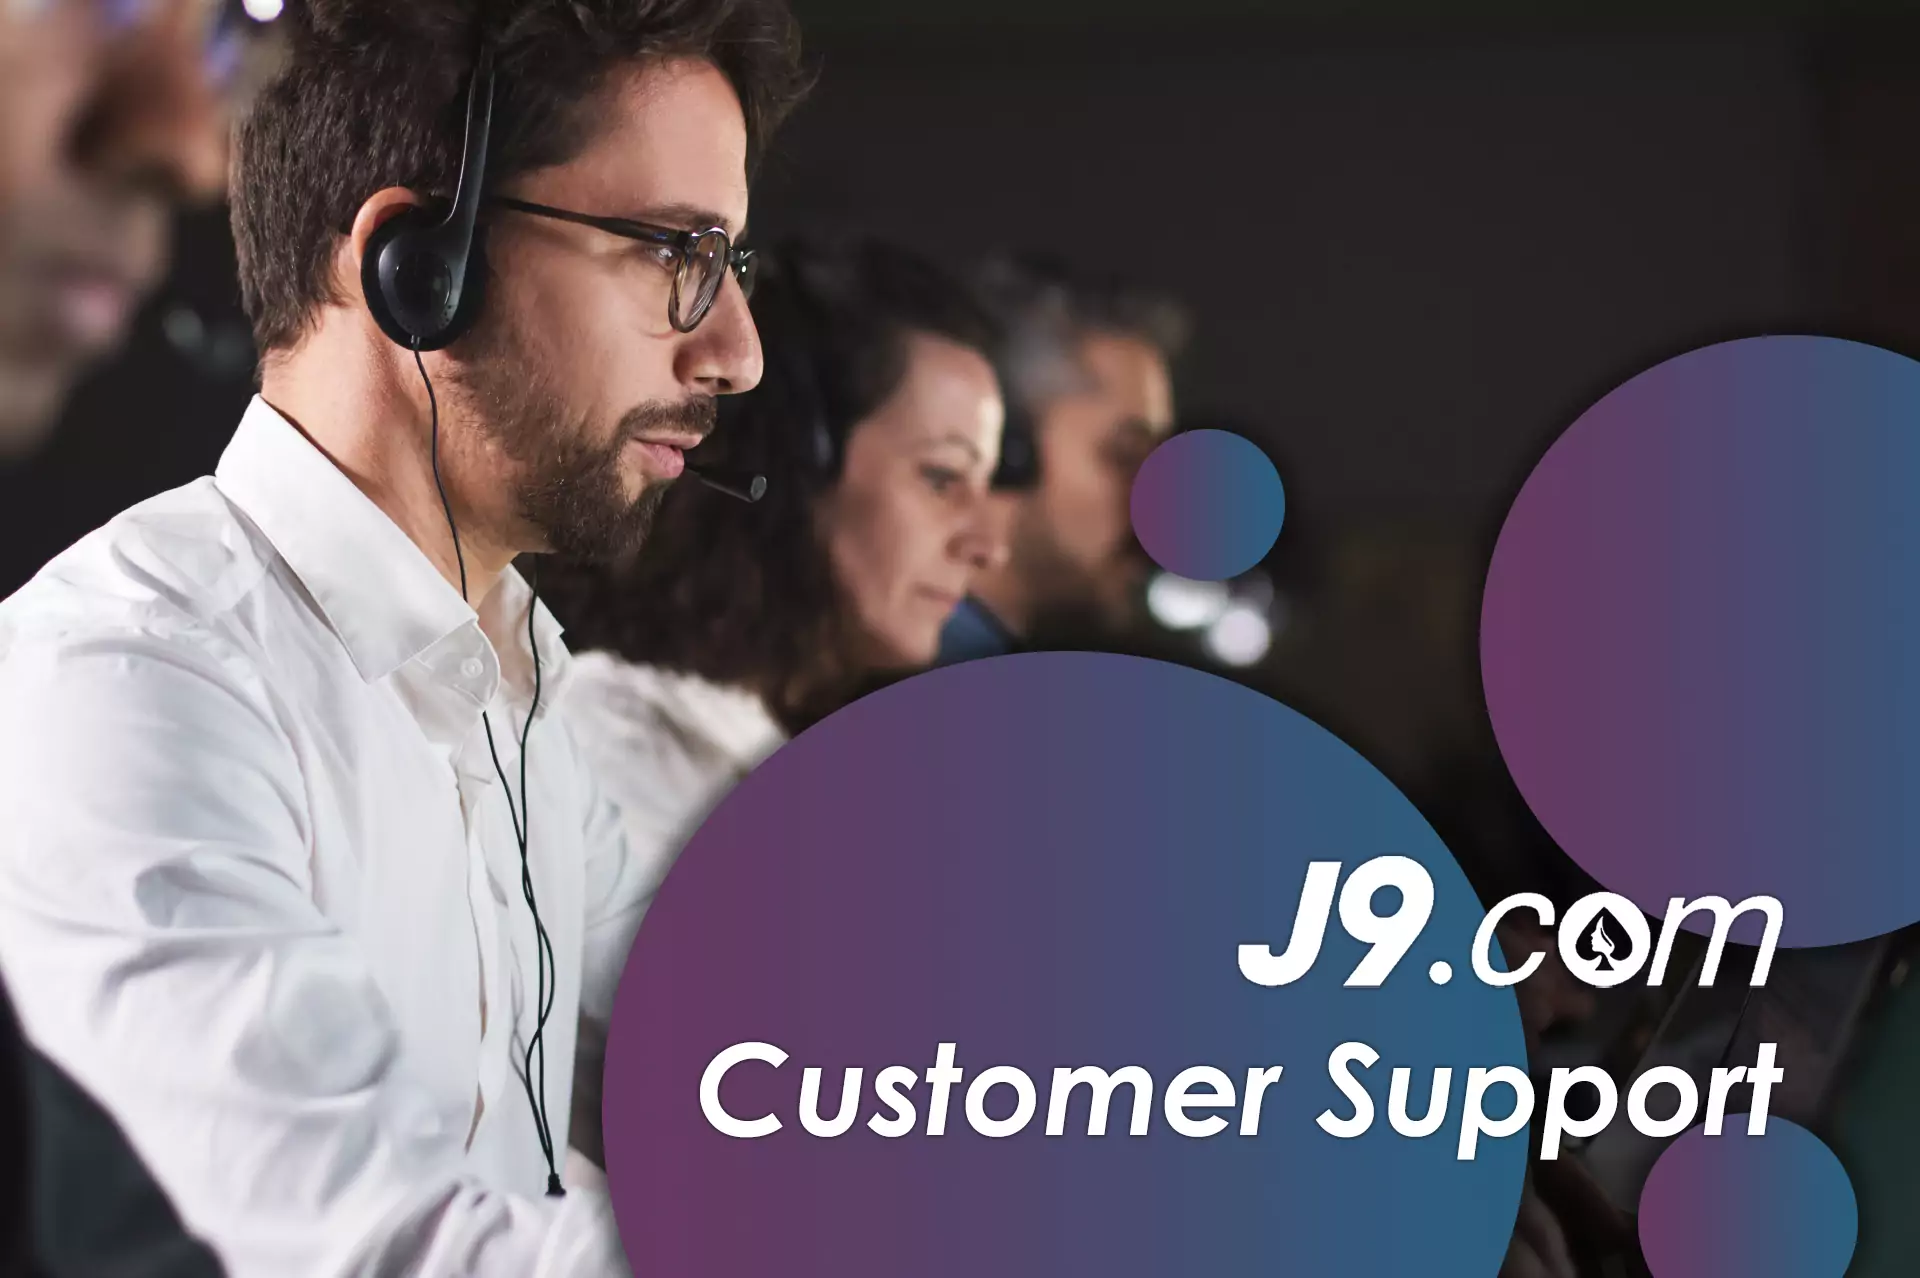 In case you have any issues betting on the site or in the app, write to the J9 support team.